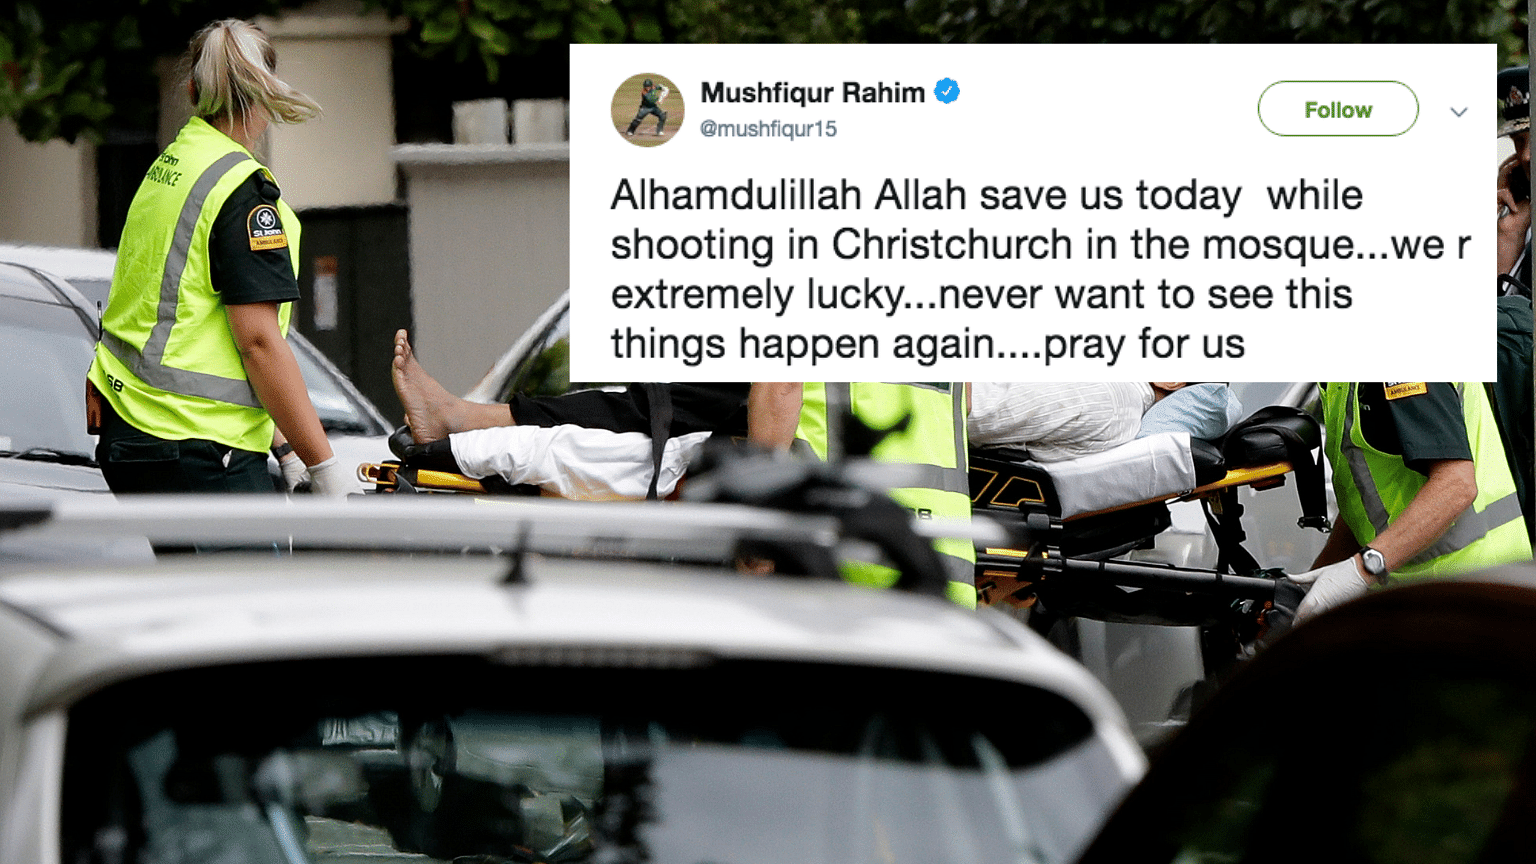 Members of the Bangladesh cricket team have described on social media their narrow escape from a mass shooting at a Christchurch mosque.